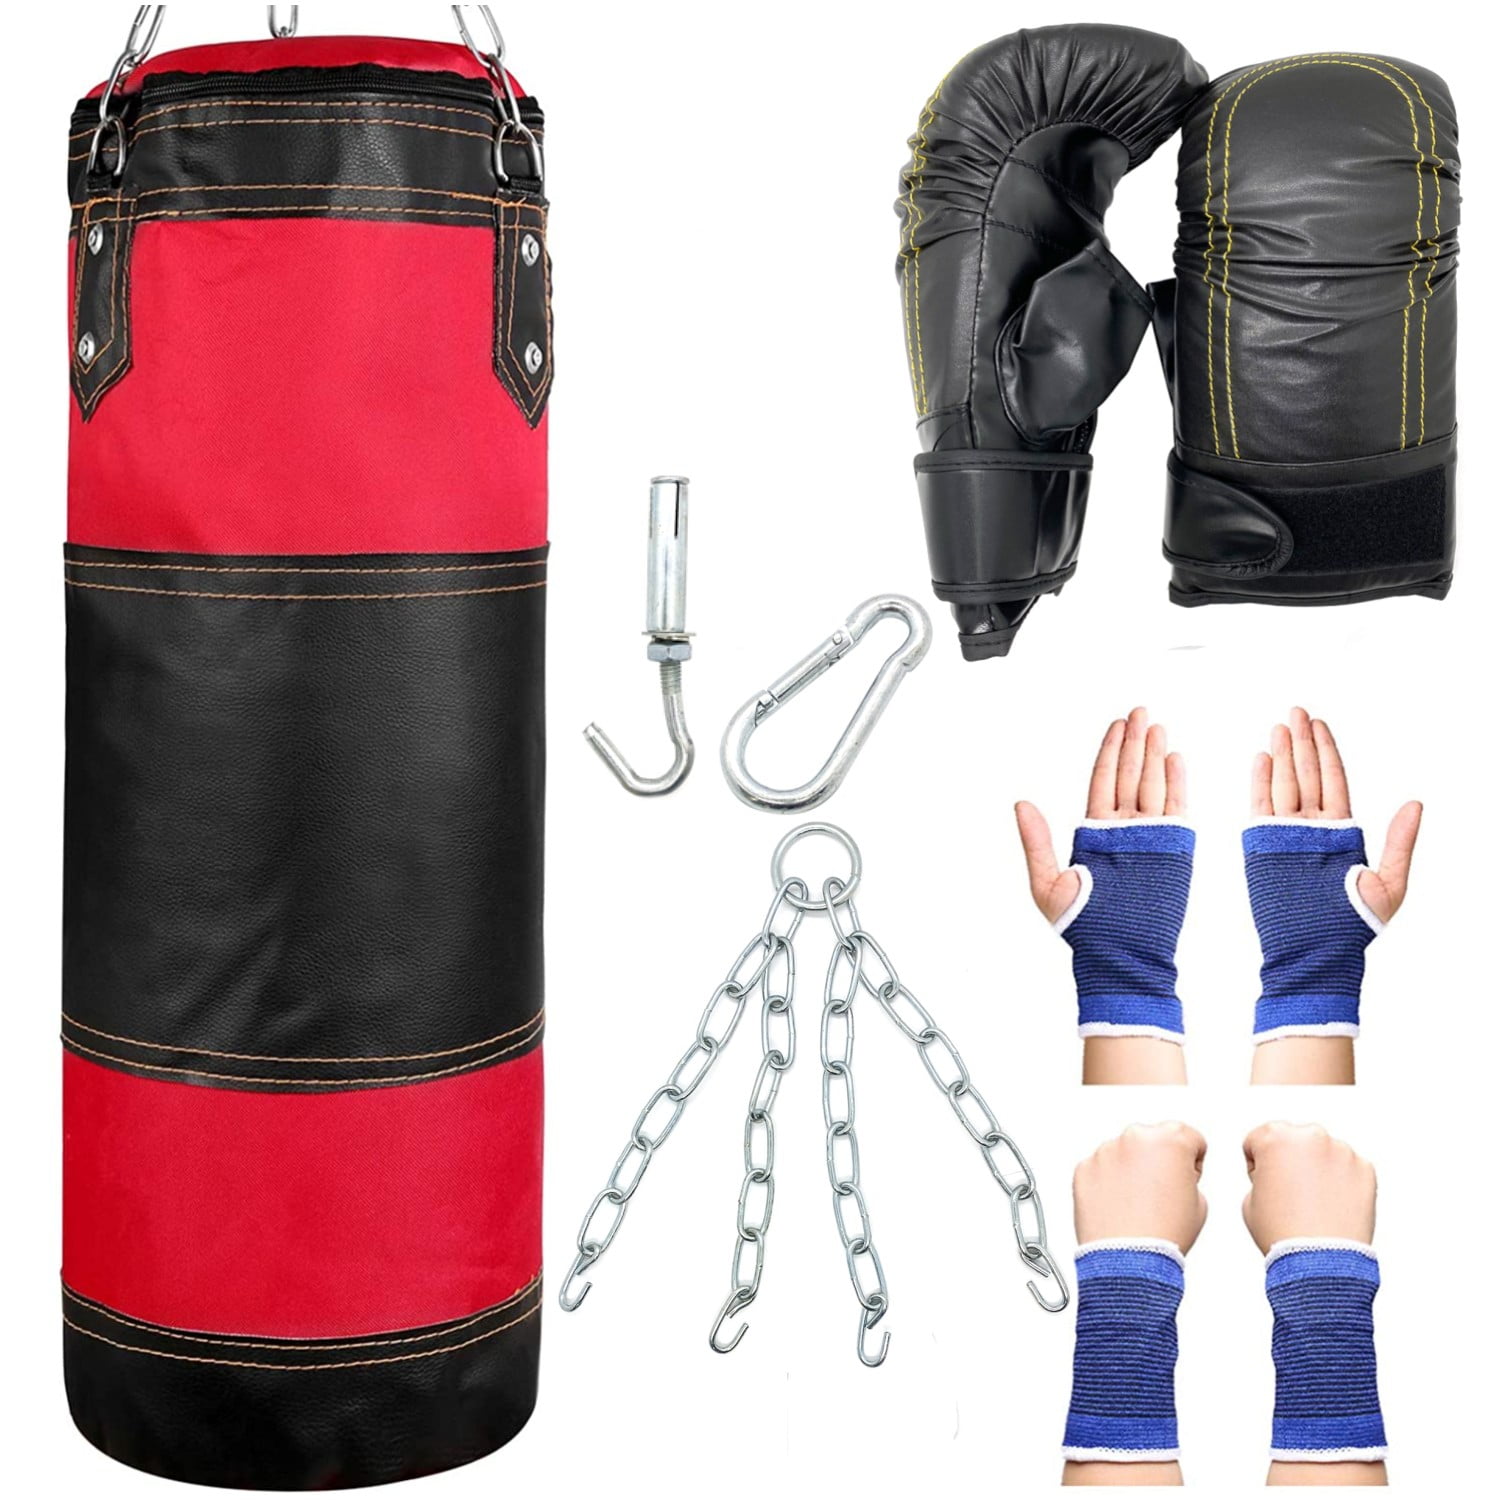 BOXING PUNCH BAG Sold Empty 3ft UN-FILLED BLACK/RED Kickboxing Karate Gym 